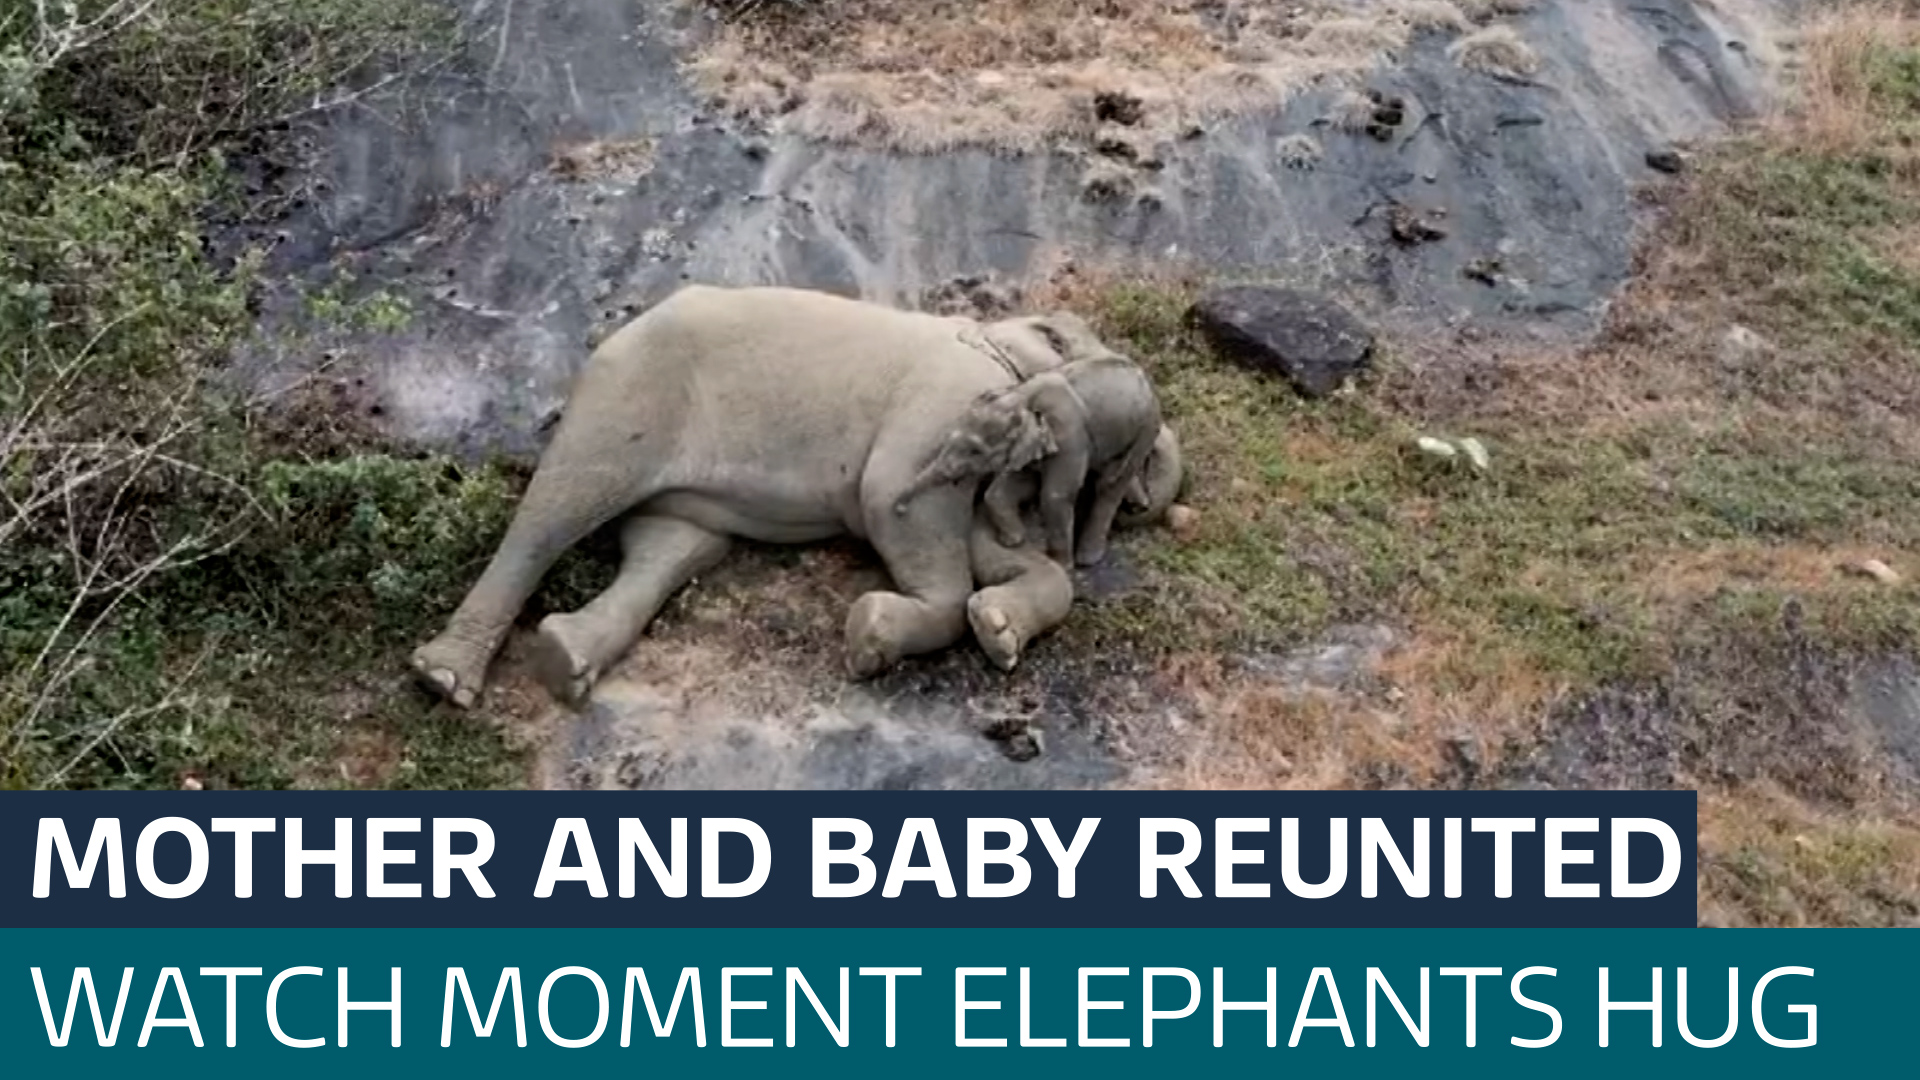 Lost baby elephant re-united with mother